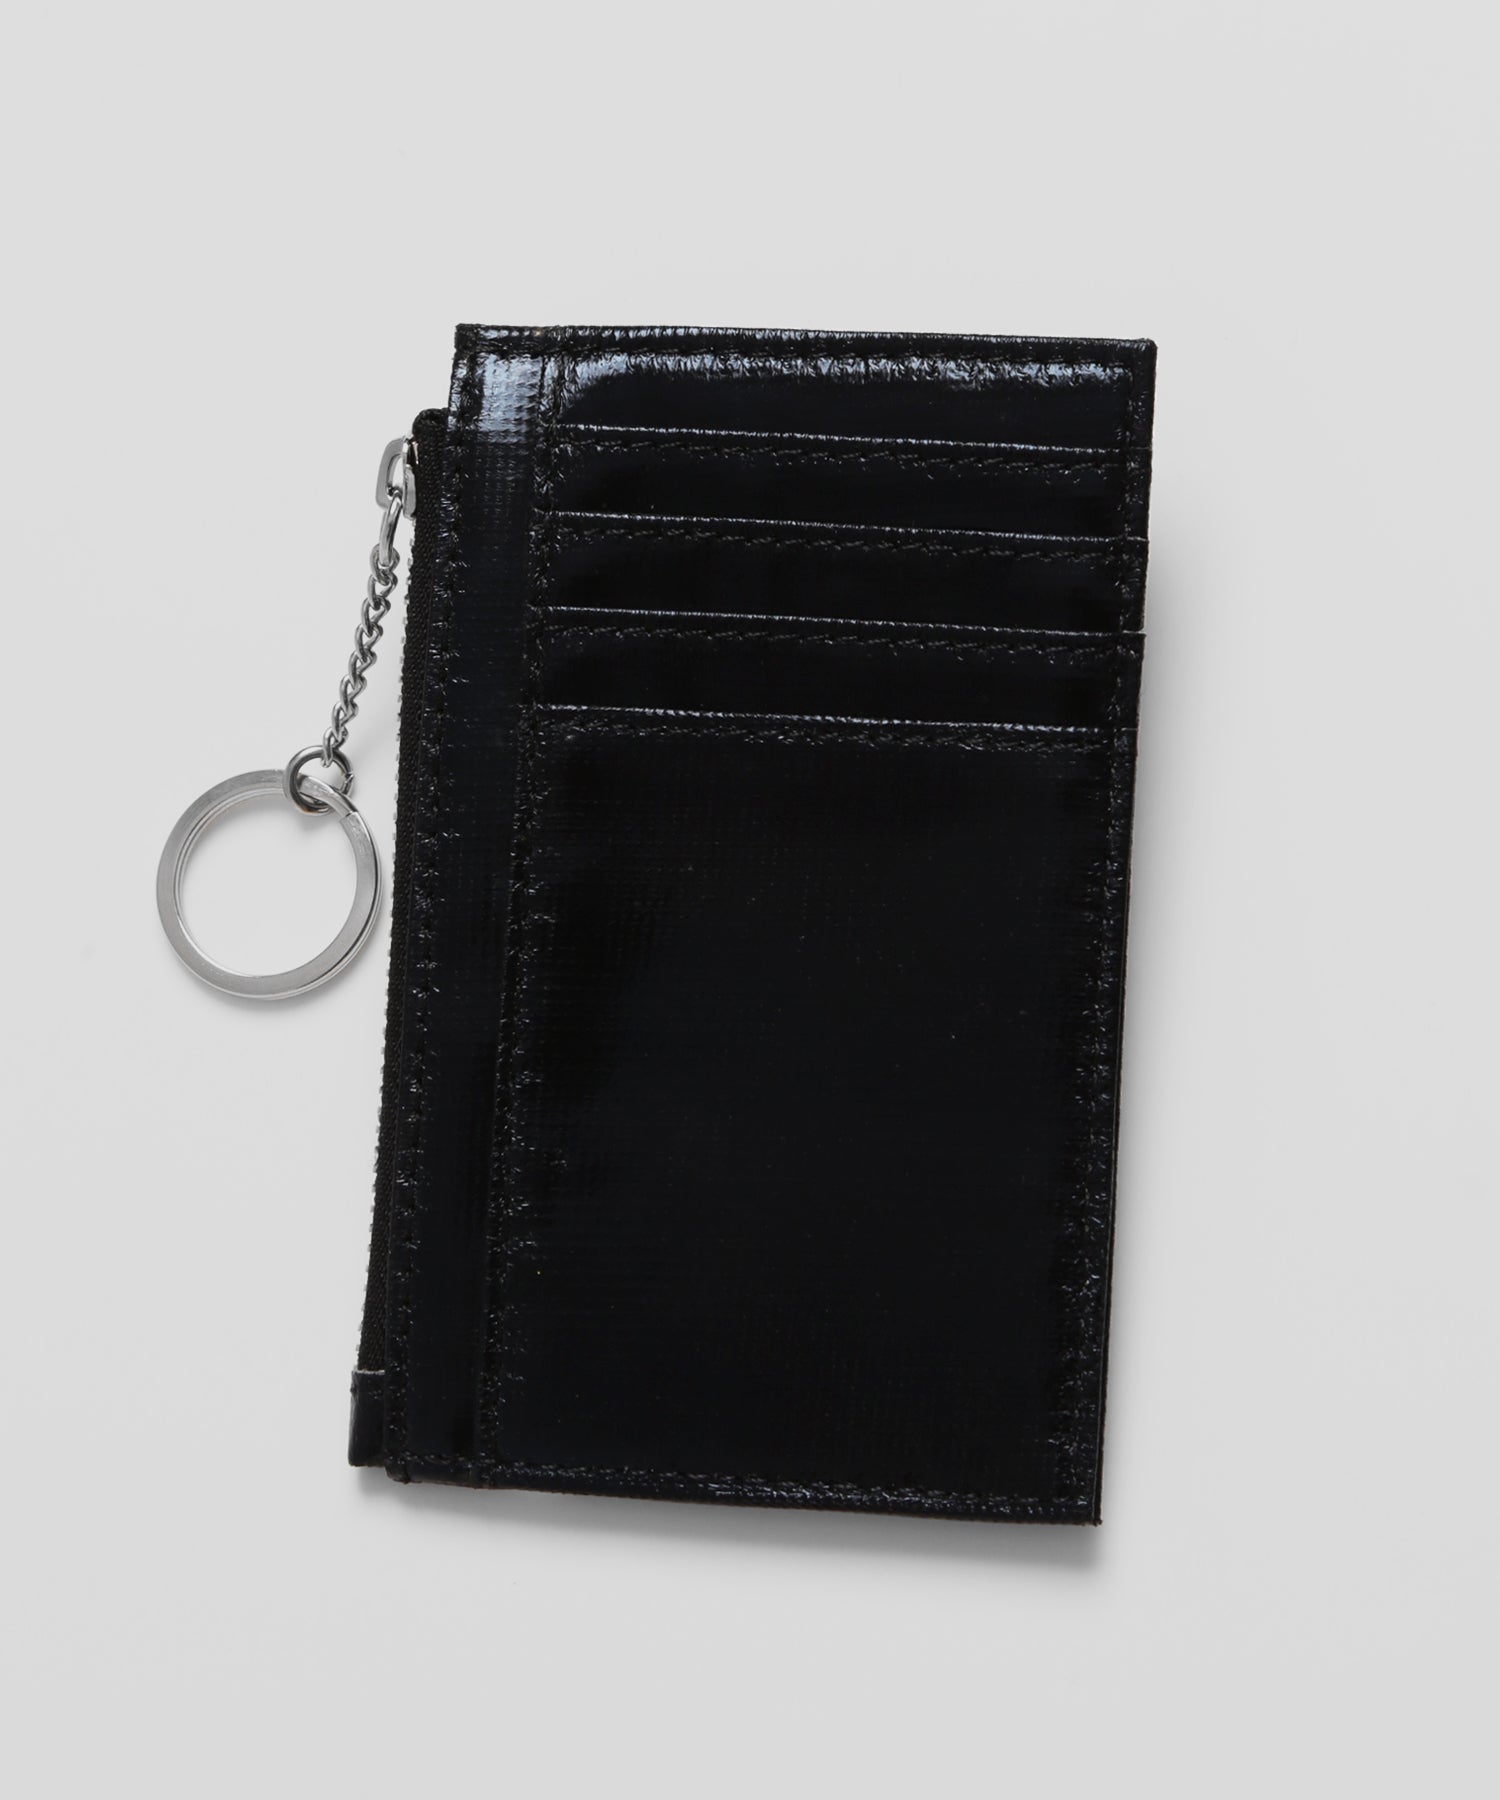 FR2 small card coin wallet[FRA533]